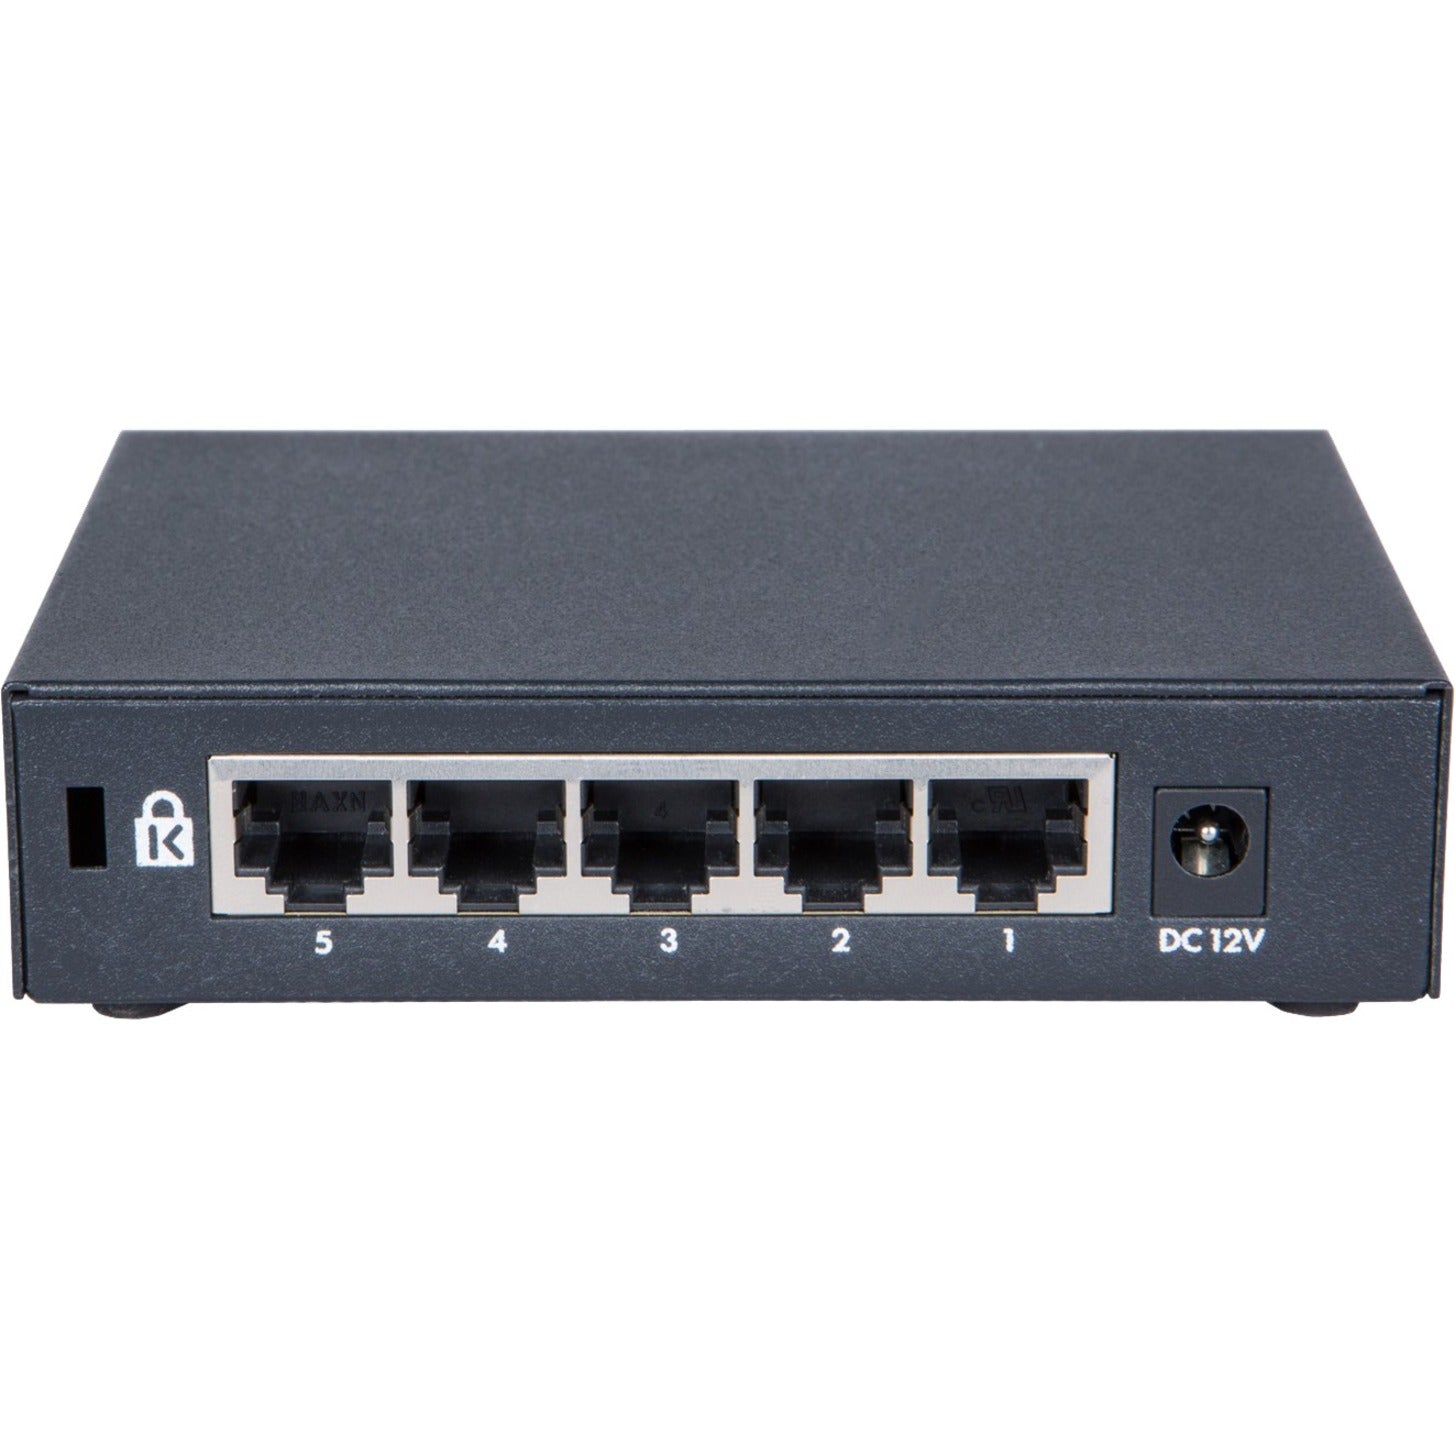 HPE OfficeConnect 1420 5G Switch, 5 Gigabit Ethernet Network Ports, Gigabit Ethernet, Twisted Pair